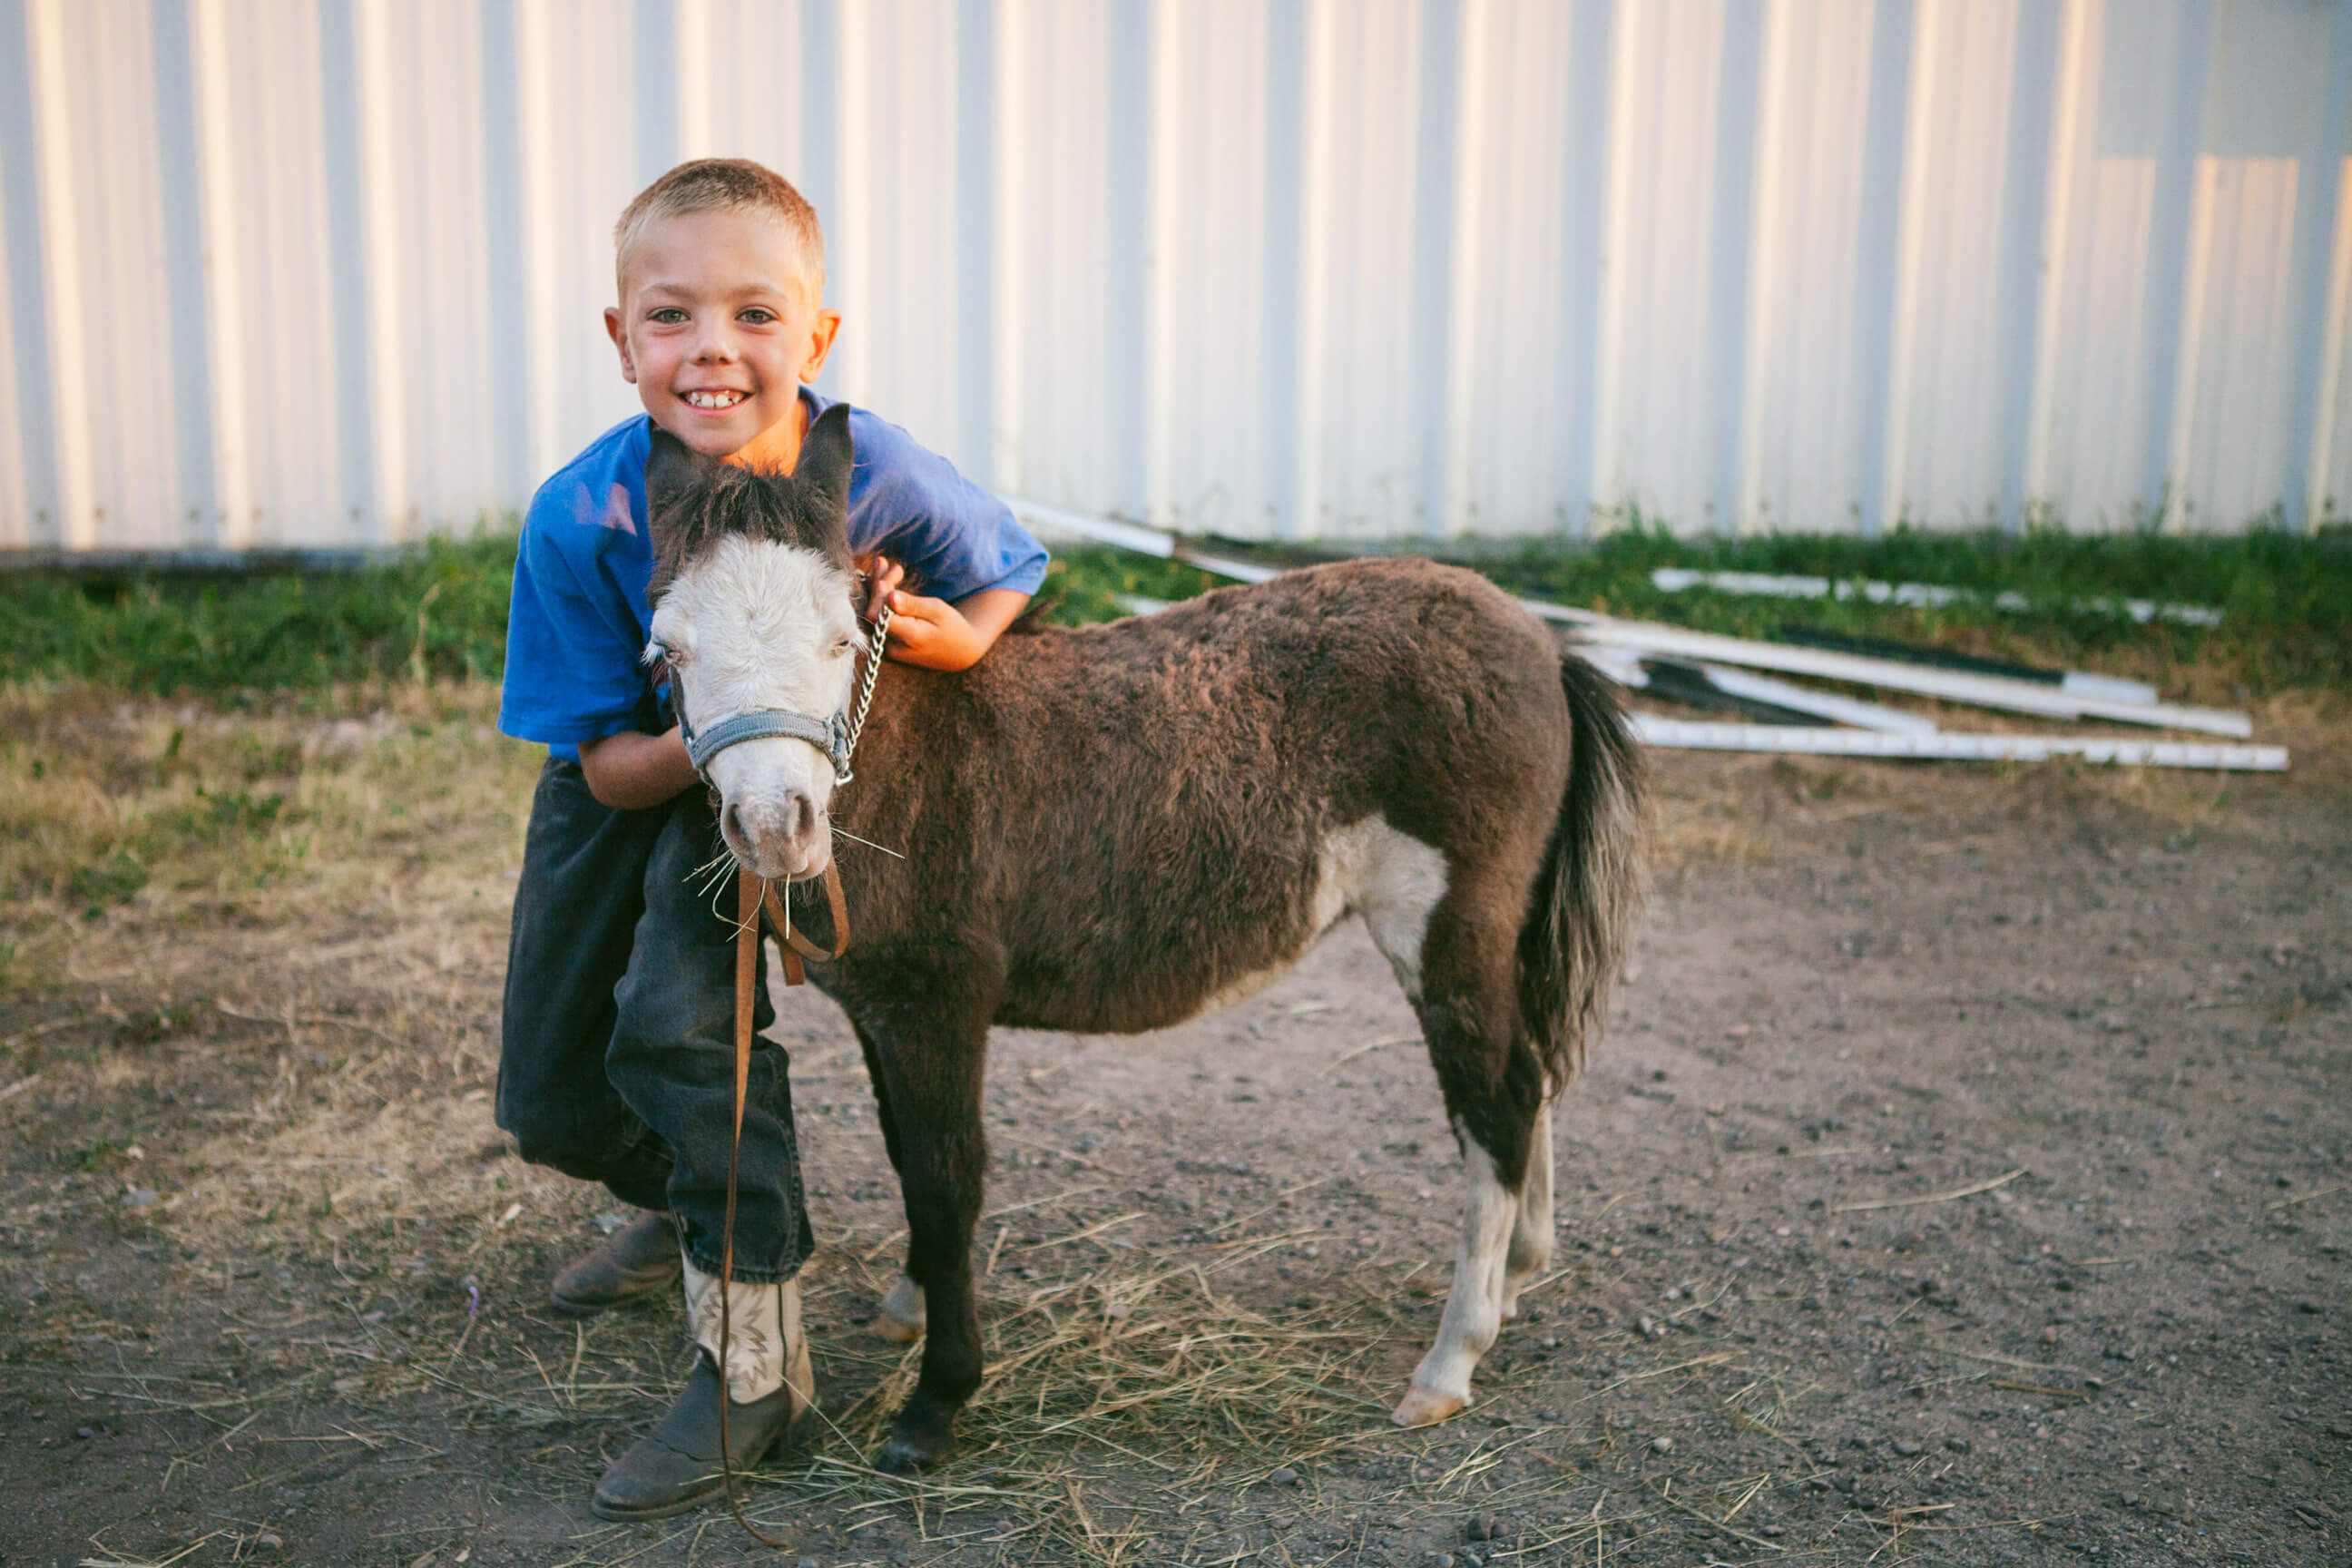 A young boy smiles and holds his pony at the Western Montana State Fair in Missoula Montana